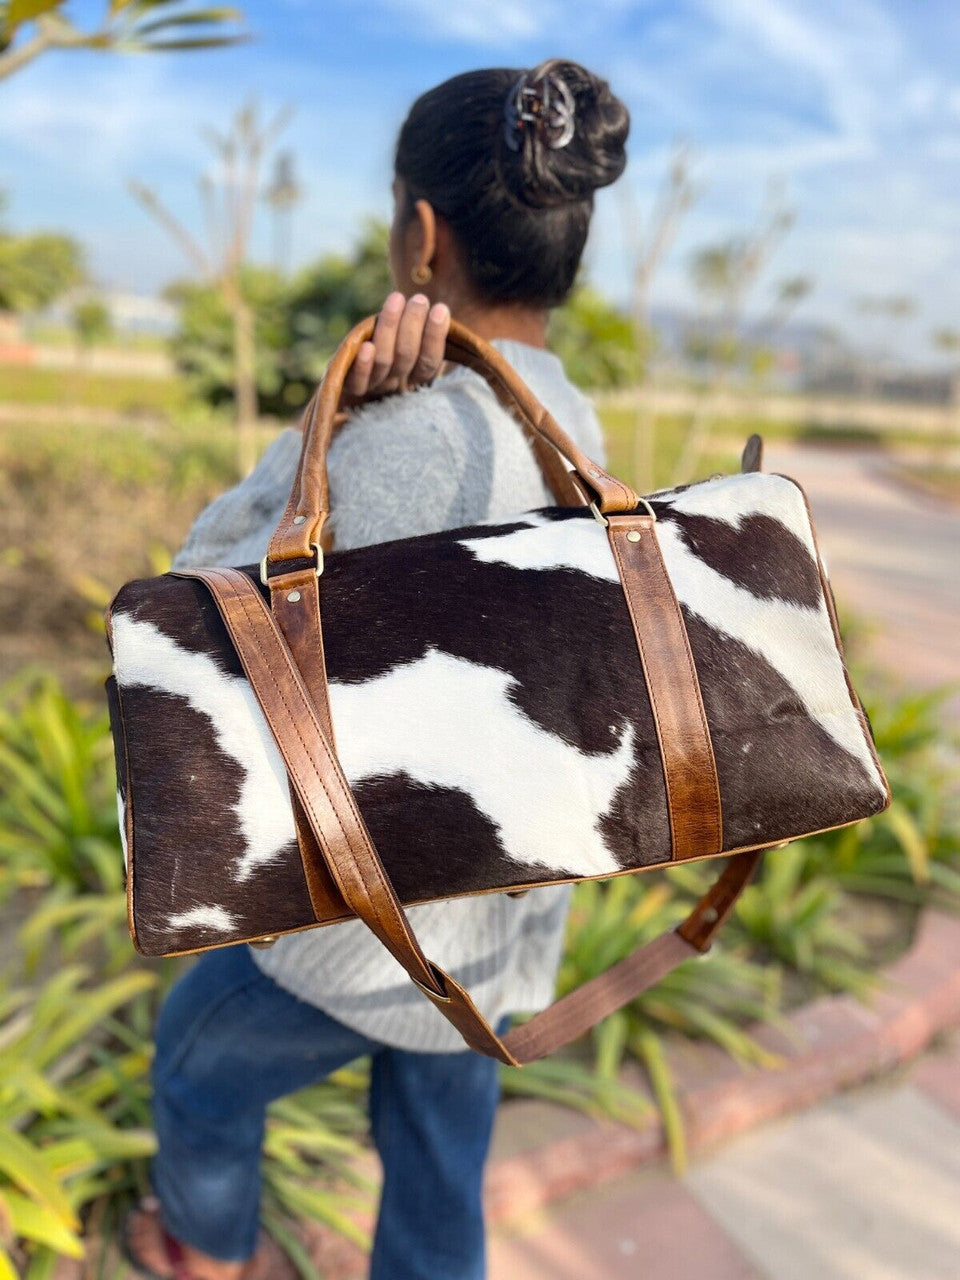 Versatile cowhide bag suitable for both men and women, on a bench.